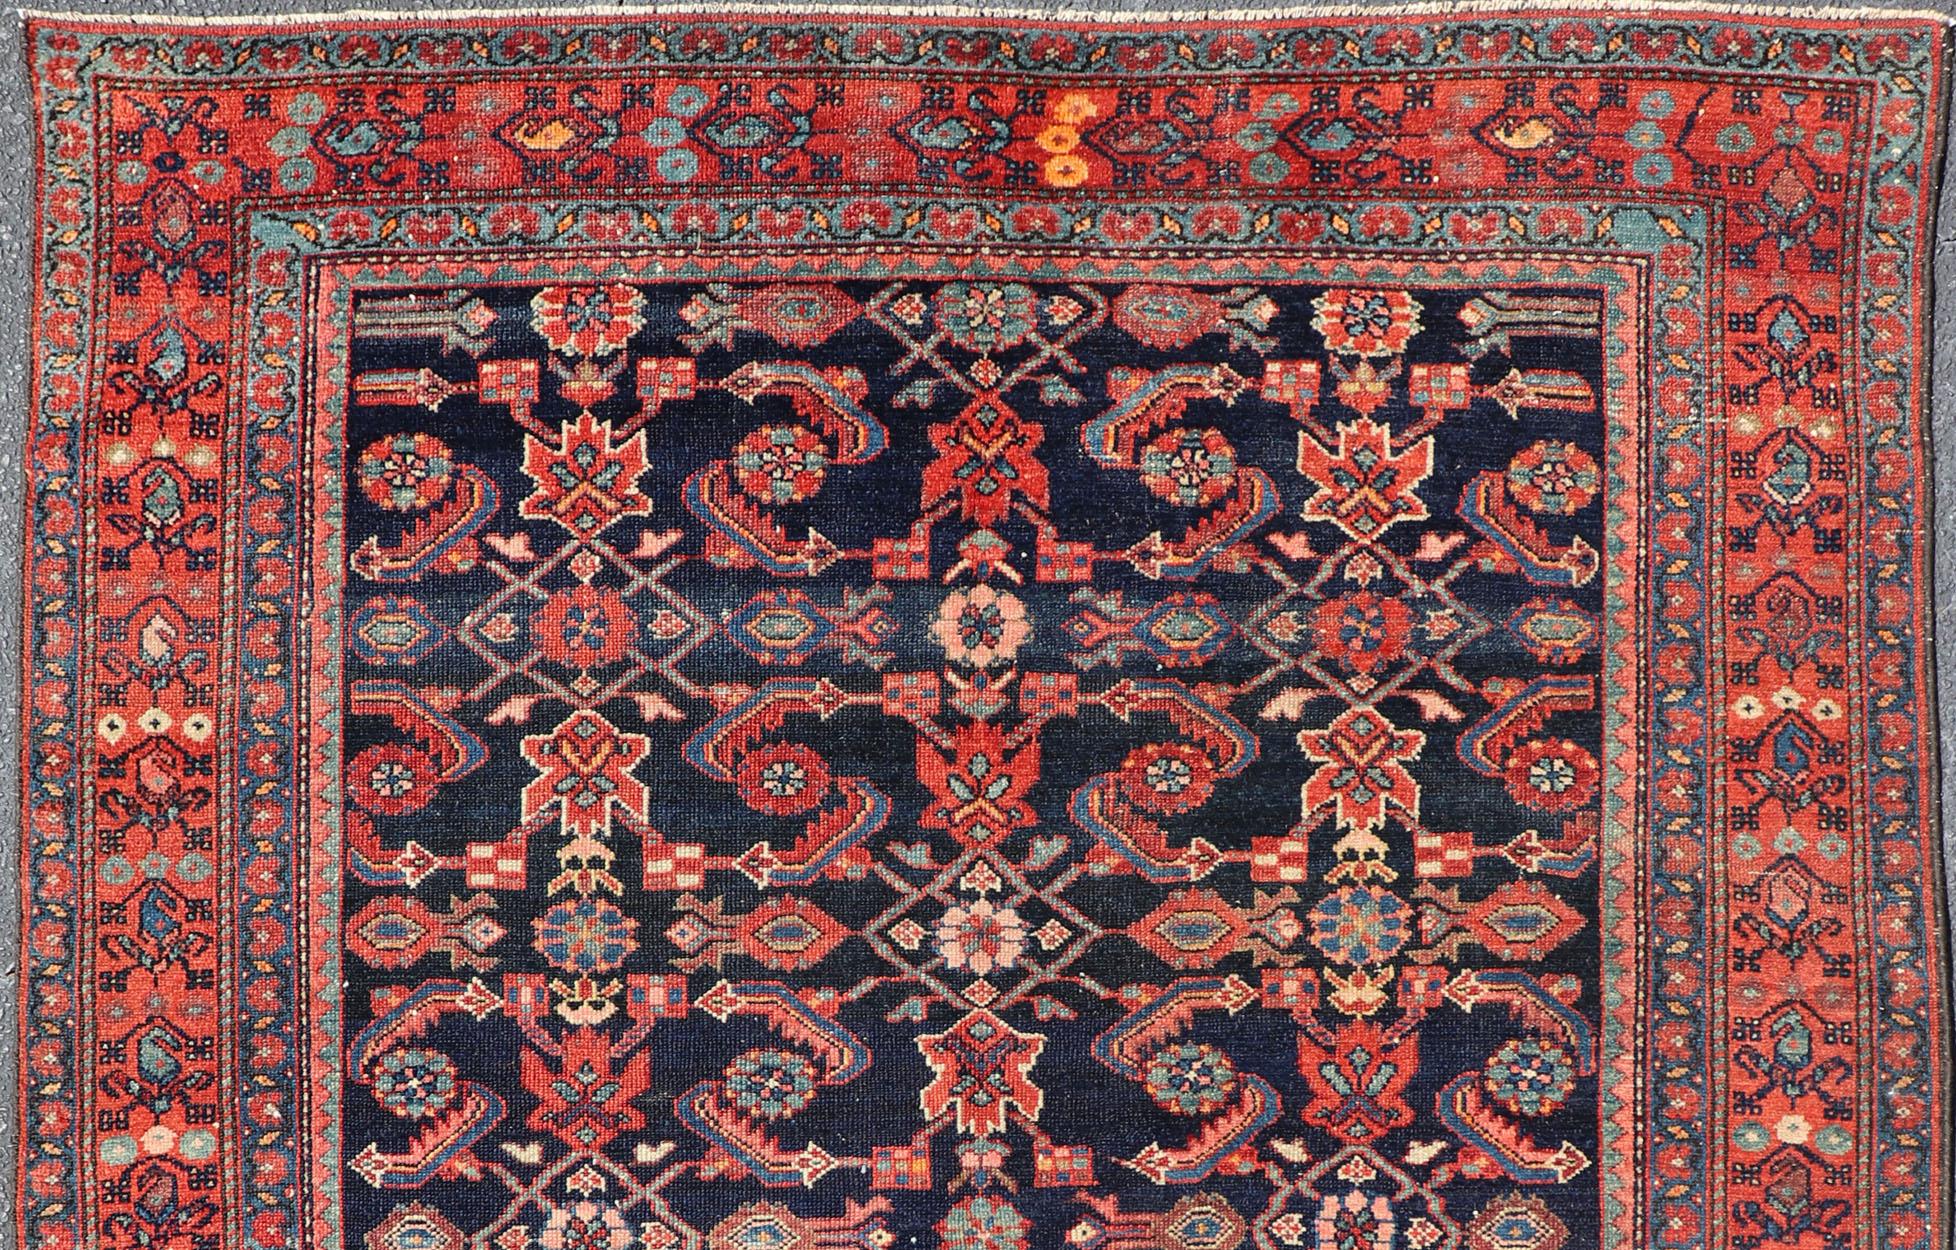 Antique Persian Malayer rug in rich blue and red colors with geometric all over design design, rug V21-0302, country of origin / type: Iran / Malayer, circa 1910.

This antique Persian Malayer rug (circa early 20th century) features a unique blend